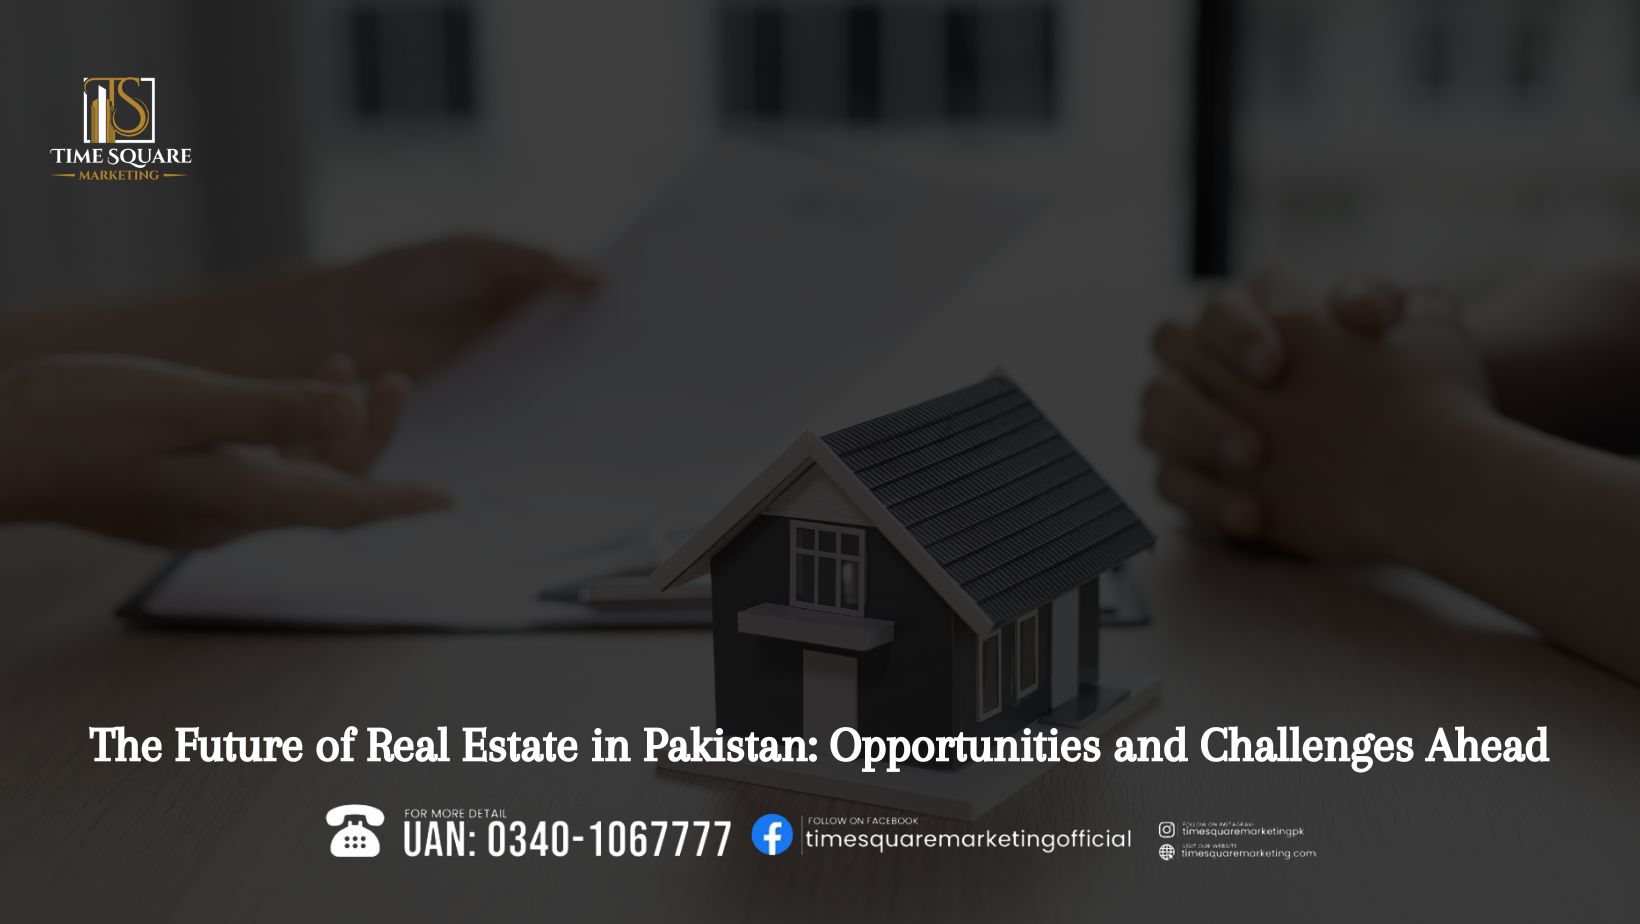 The Future of Real Estate in Pakistan Opportunities and Challenges Ahead